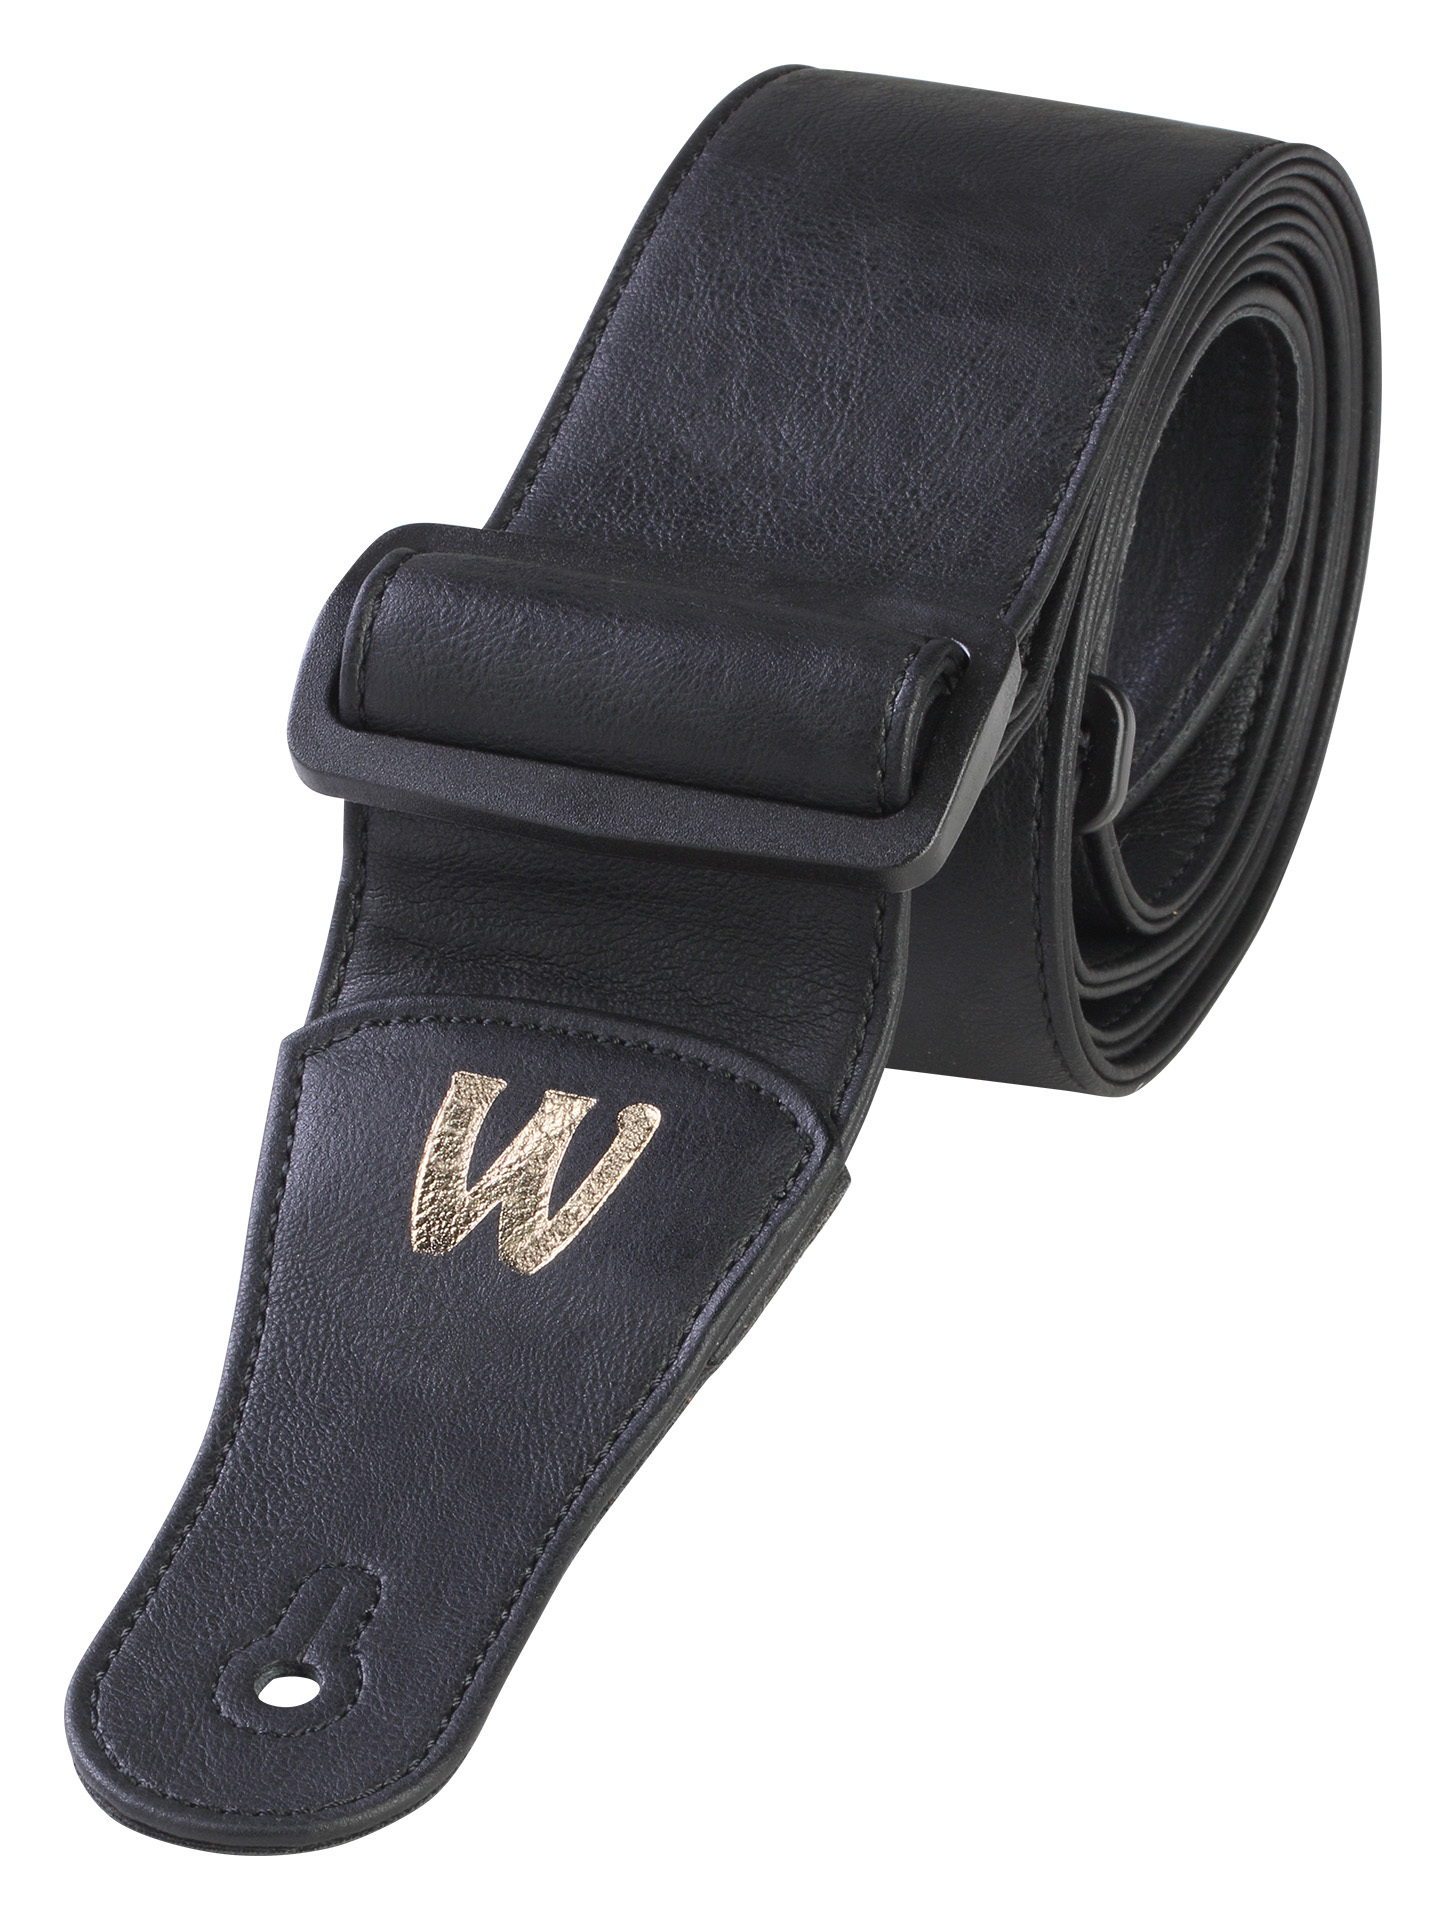 Warwick Synthetic Leather Bass Strap - Black, Gold Embossing